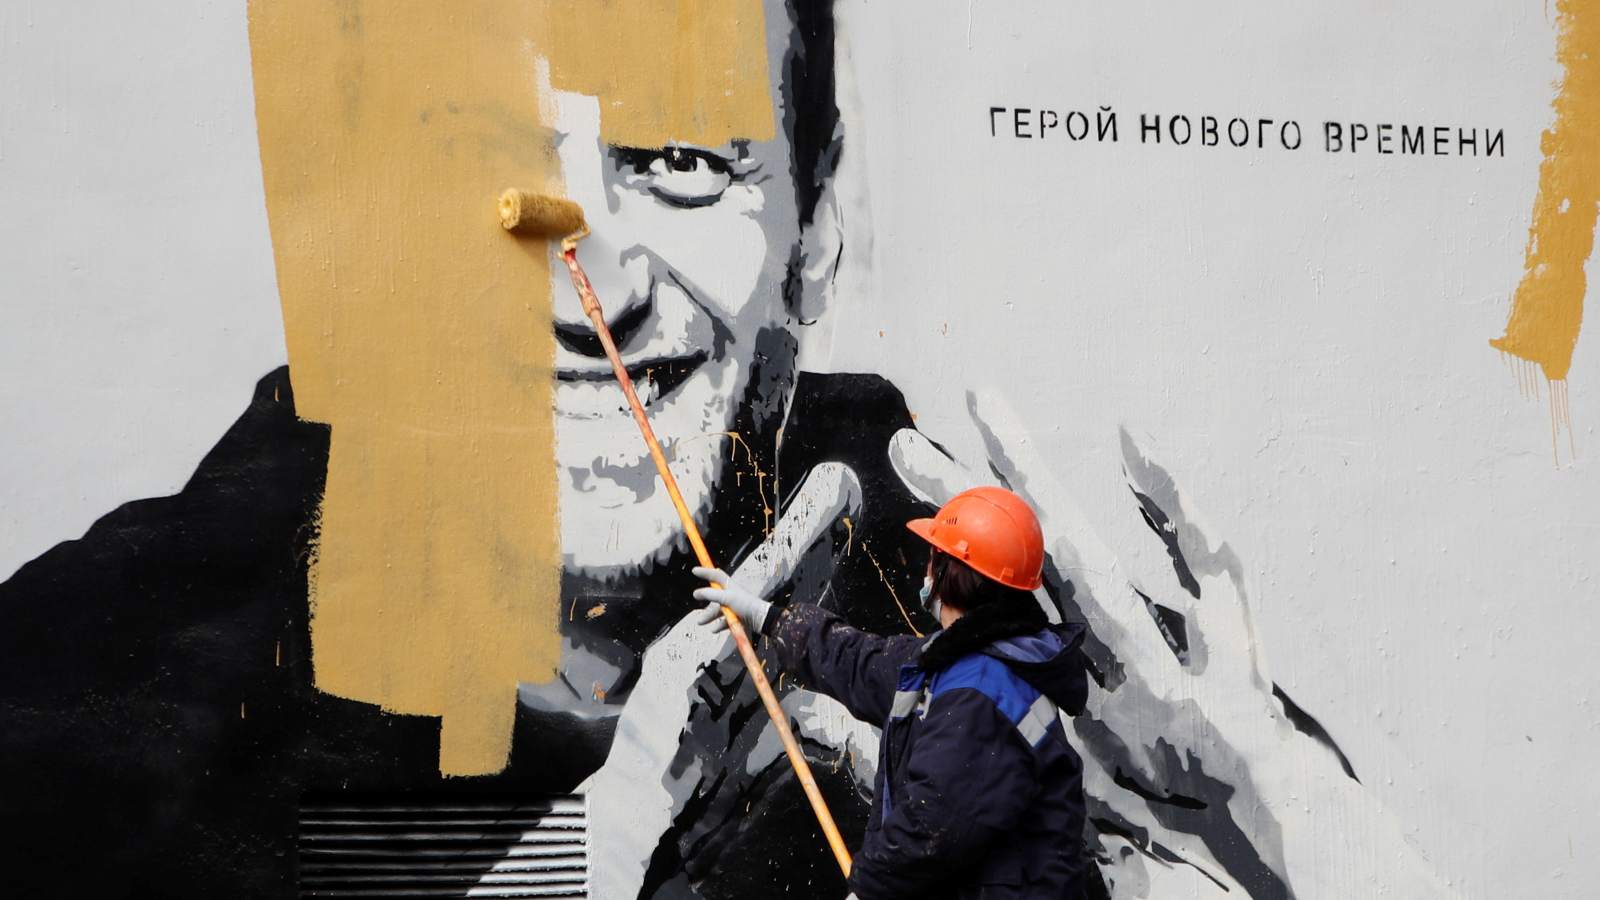 Photo: A worker paints over a graffiti depicting jailed Russian opposition politician Alexei Navalny in Saint Petersburg, Russia April 28, 2021. The graffiti reads: "The hero of the new age". Credit: REUTERS/Anton Vagano